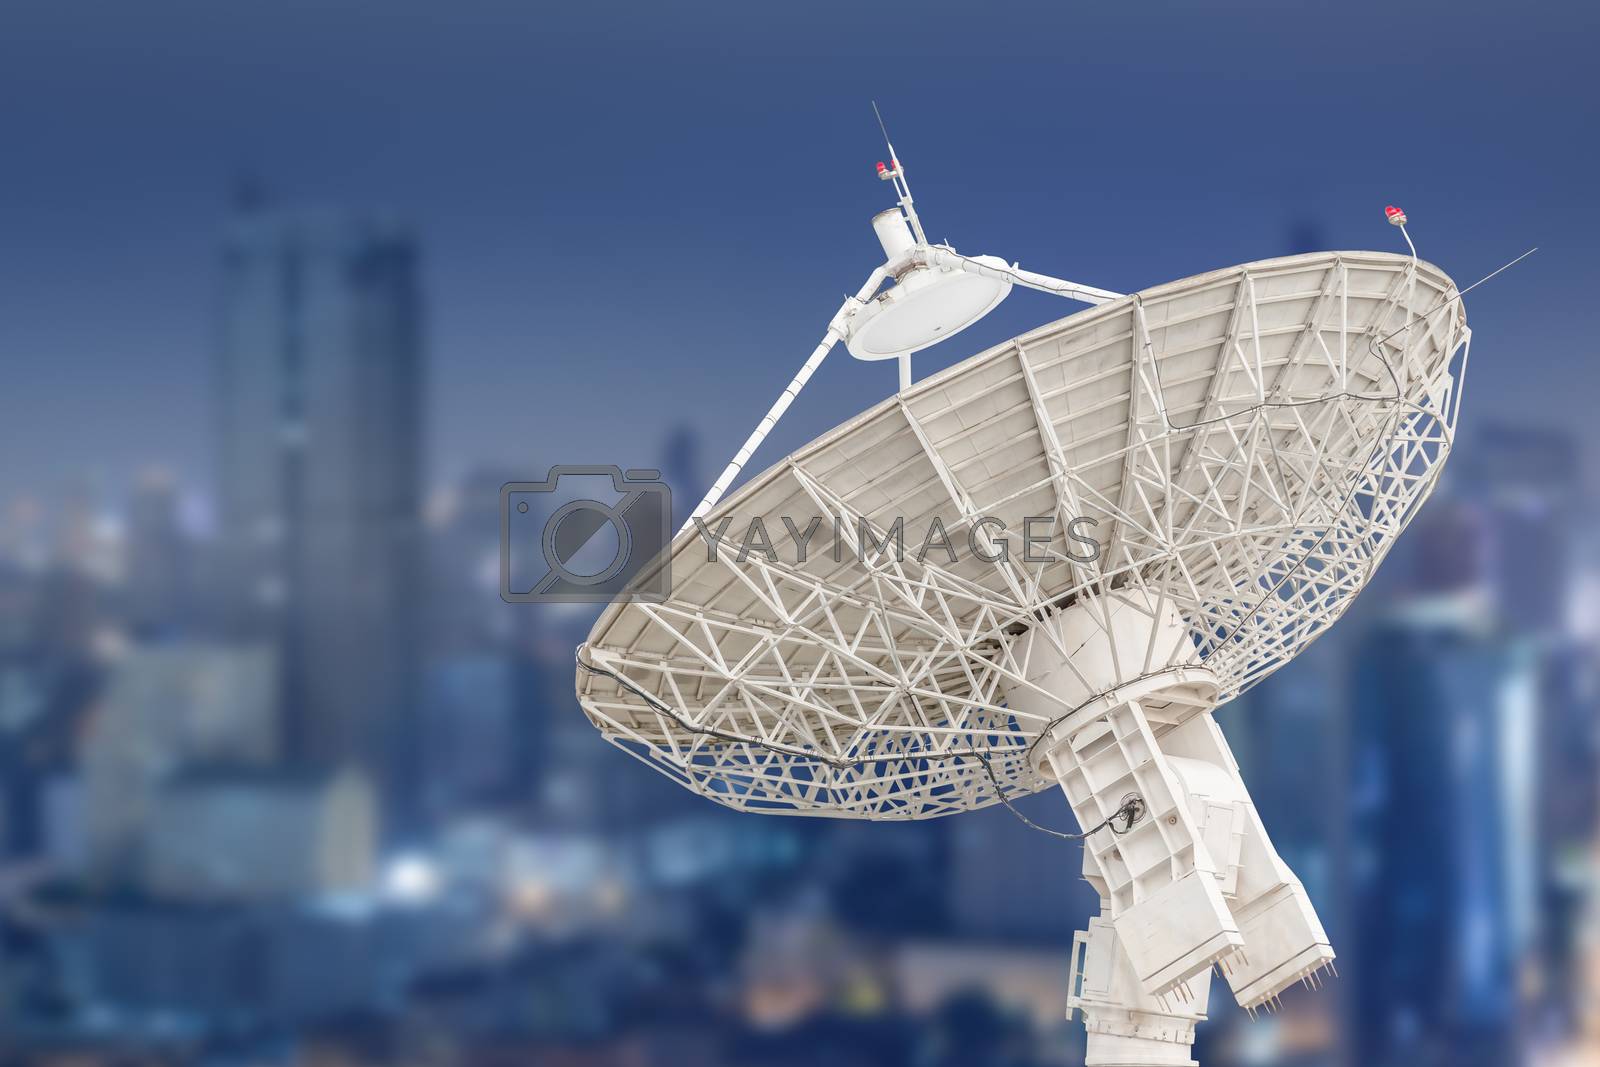 Royalty free image of satellite dish antenna radar and building background by FrameAngel